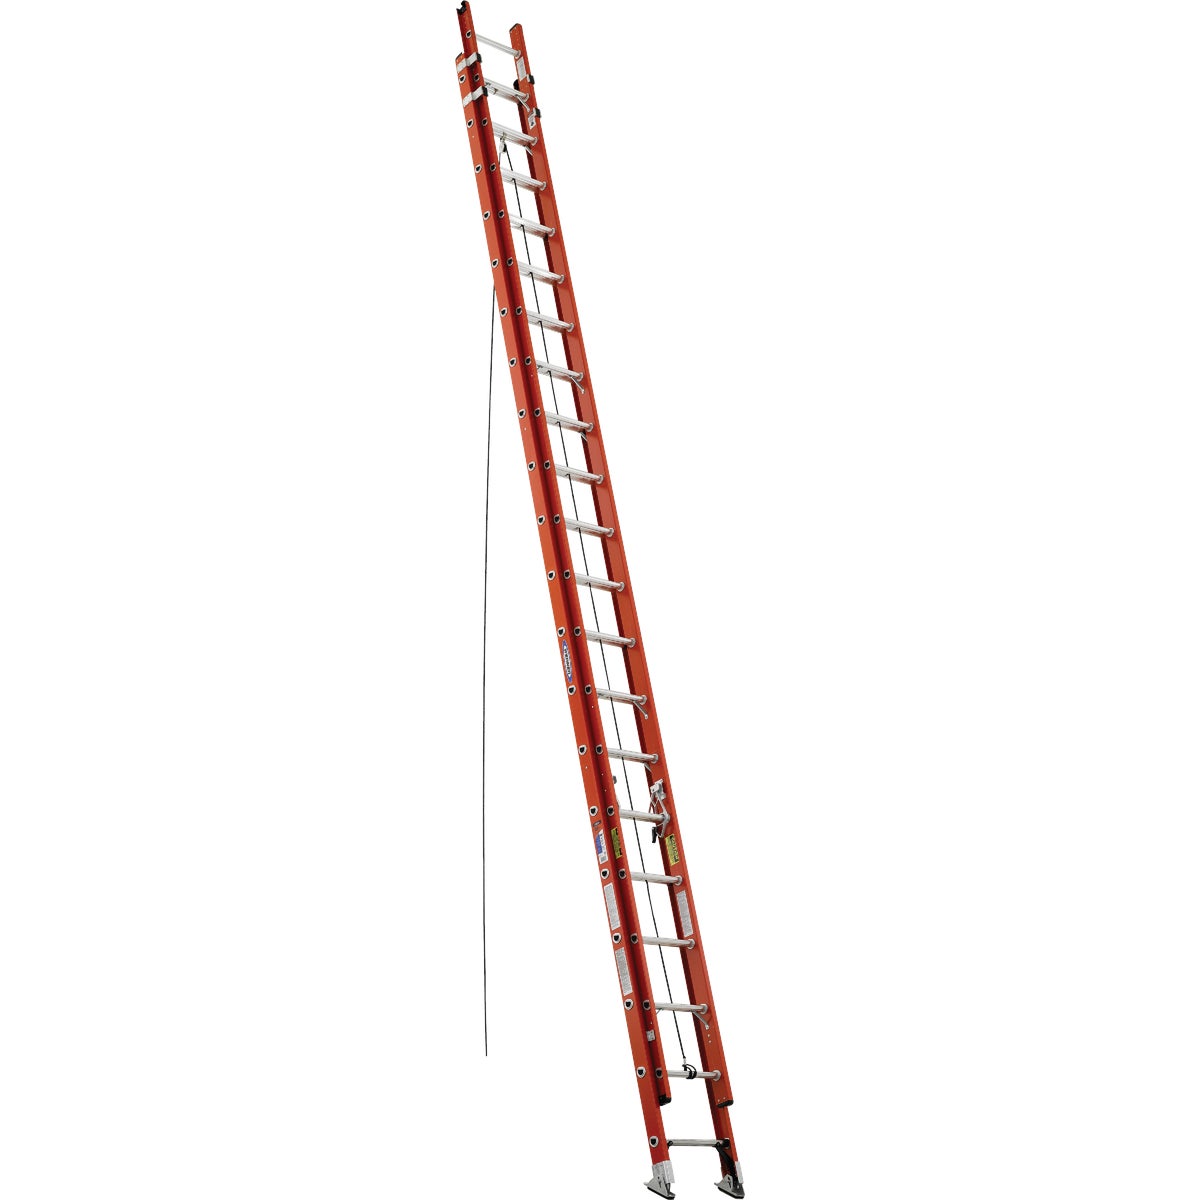 Werner 40 Ft. Fiberglass Extension Ladder with 300 Lb. Load Capacity Type IA Duty Rating